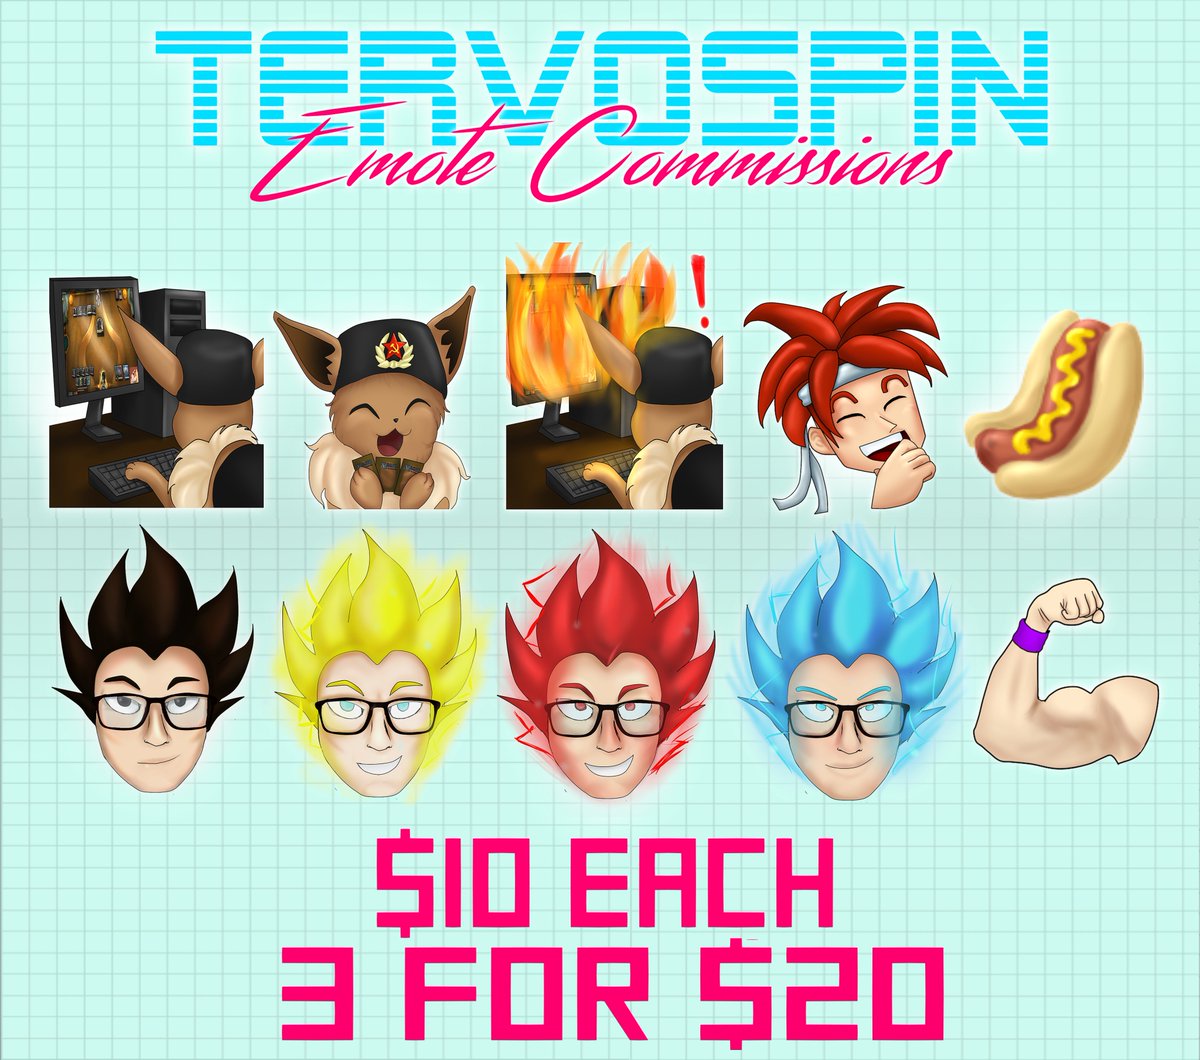 CURRENTLY OPEN: Twitch Emote and sub badge commissions! 
2/3 SLOTS AVAILABLE! Reply or DM me for inquiries. :D 

#TwitchEmotes #CommissionsOpen #Commissions #TwitchArtists #TwitchCommissions #Twitch #TwitchStreamers #SmallStreamer